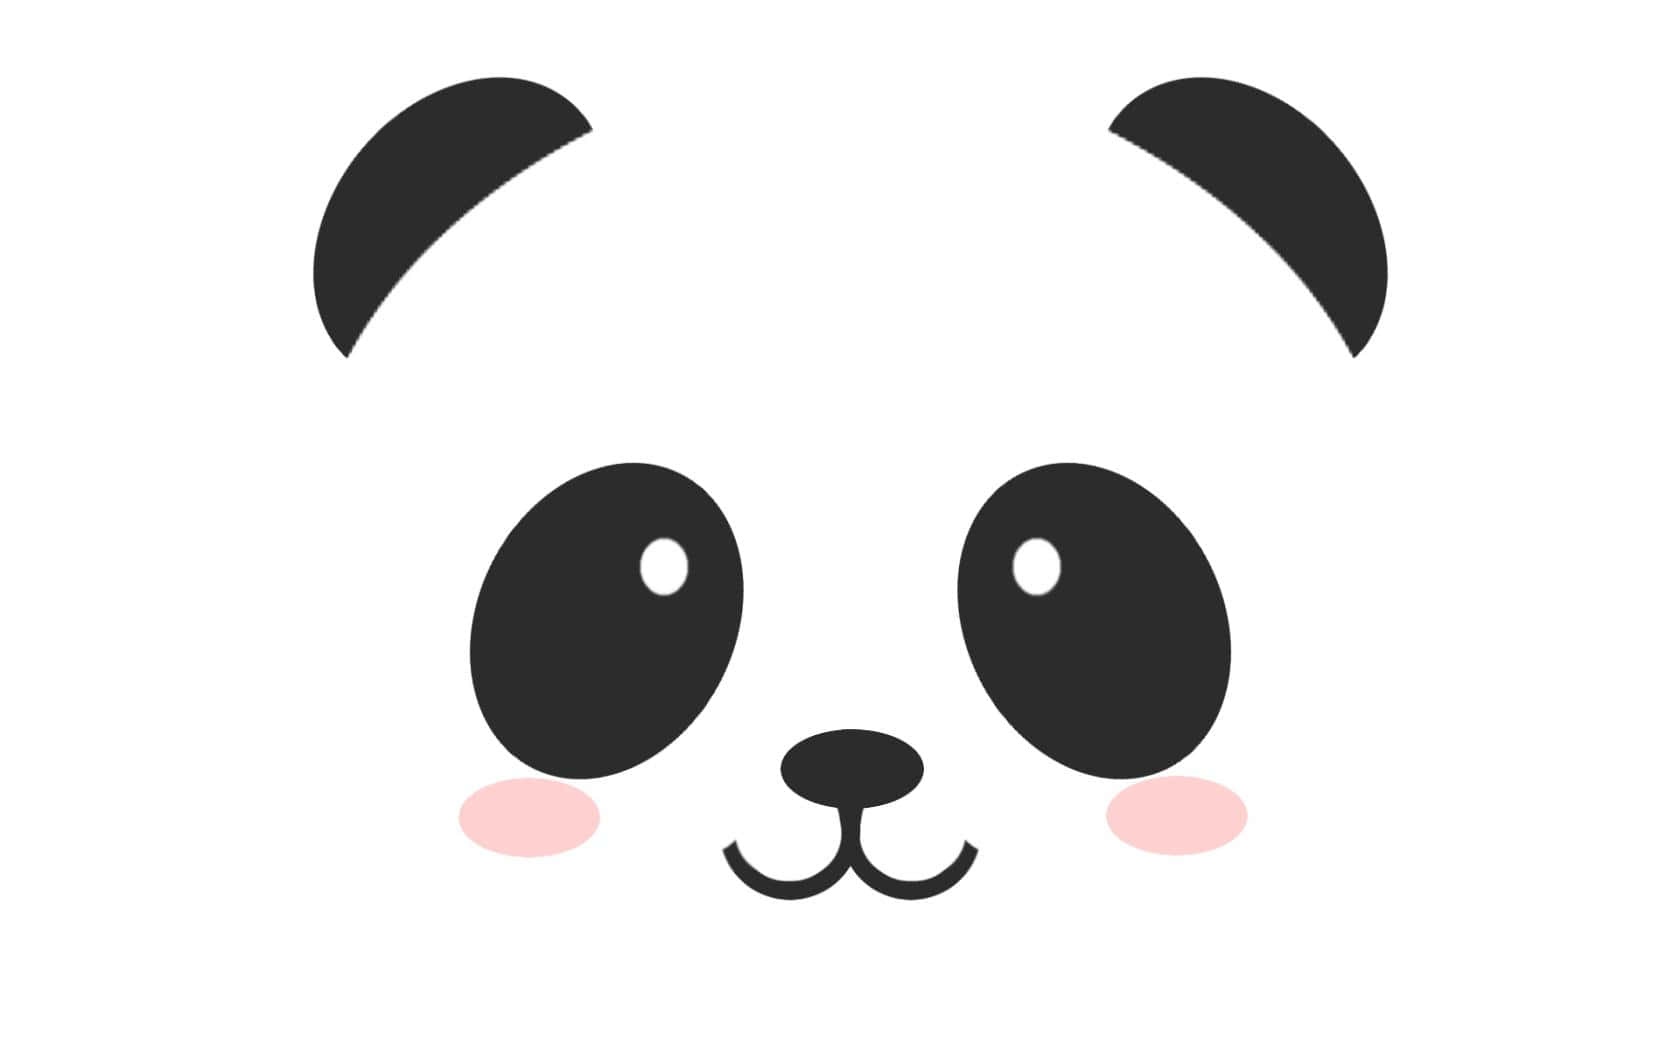 A Panda Face With Black And Pink Eyes Wallpaper